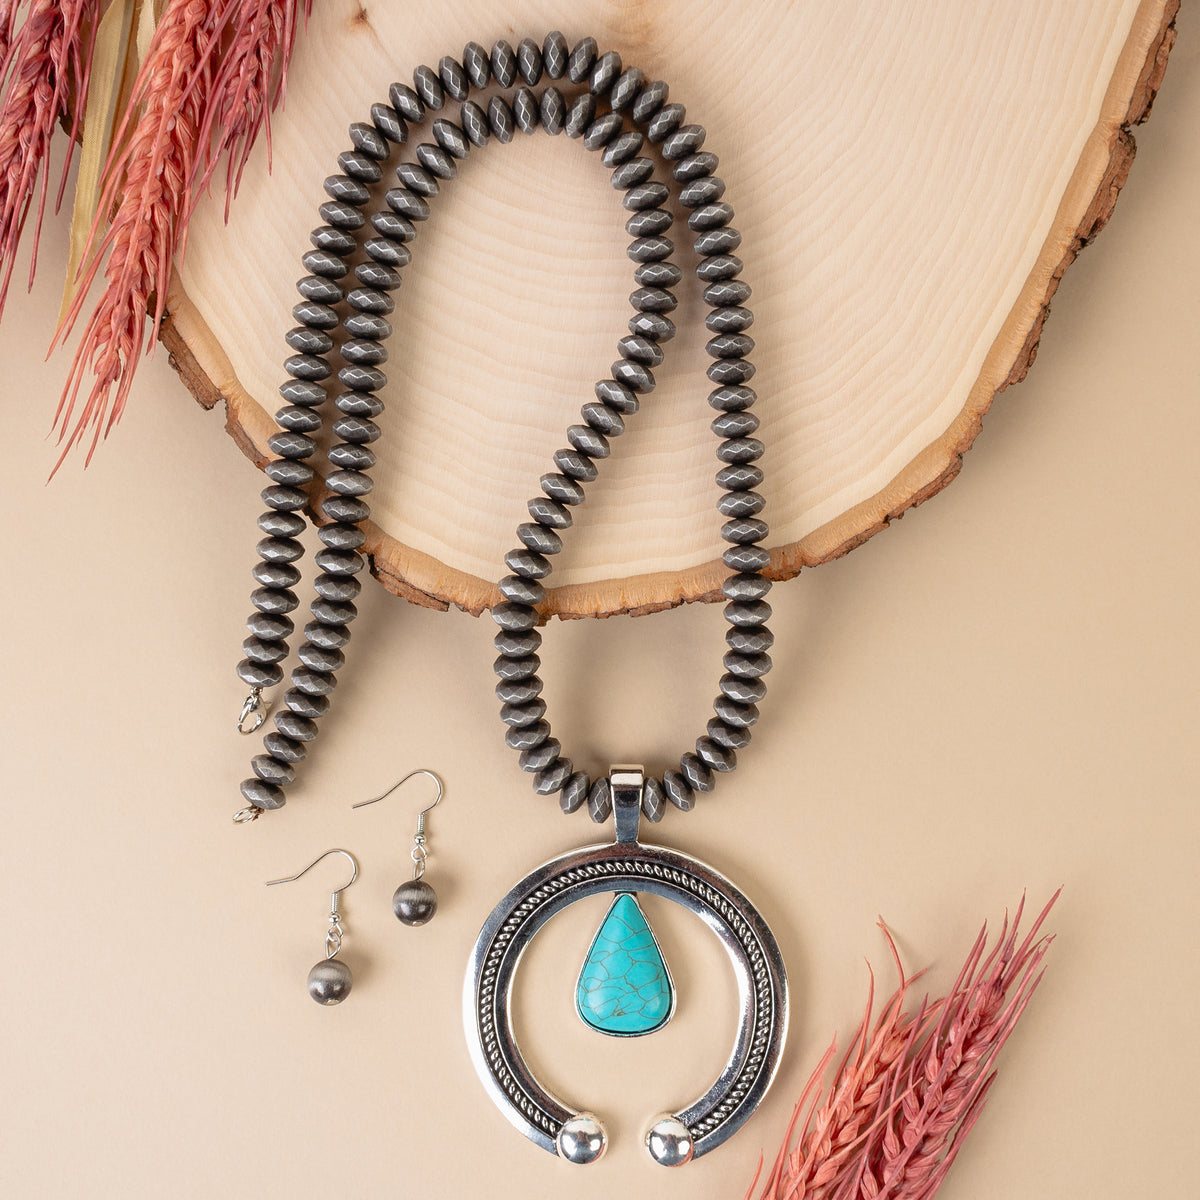 92009 - Squash Blossom Necklace - Turquoise & Silver